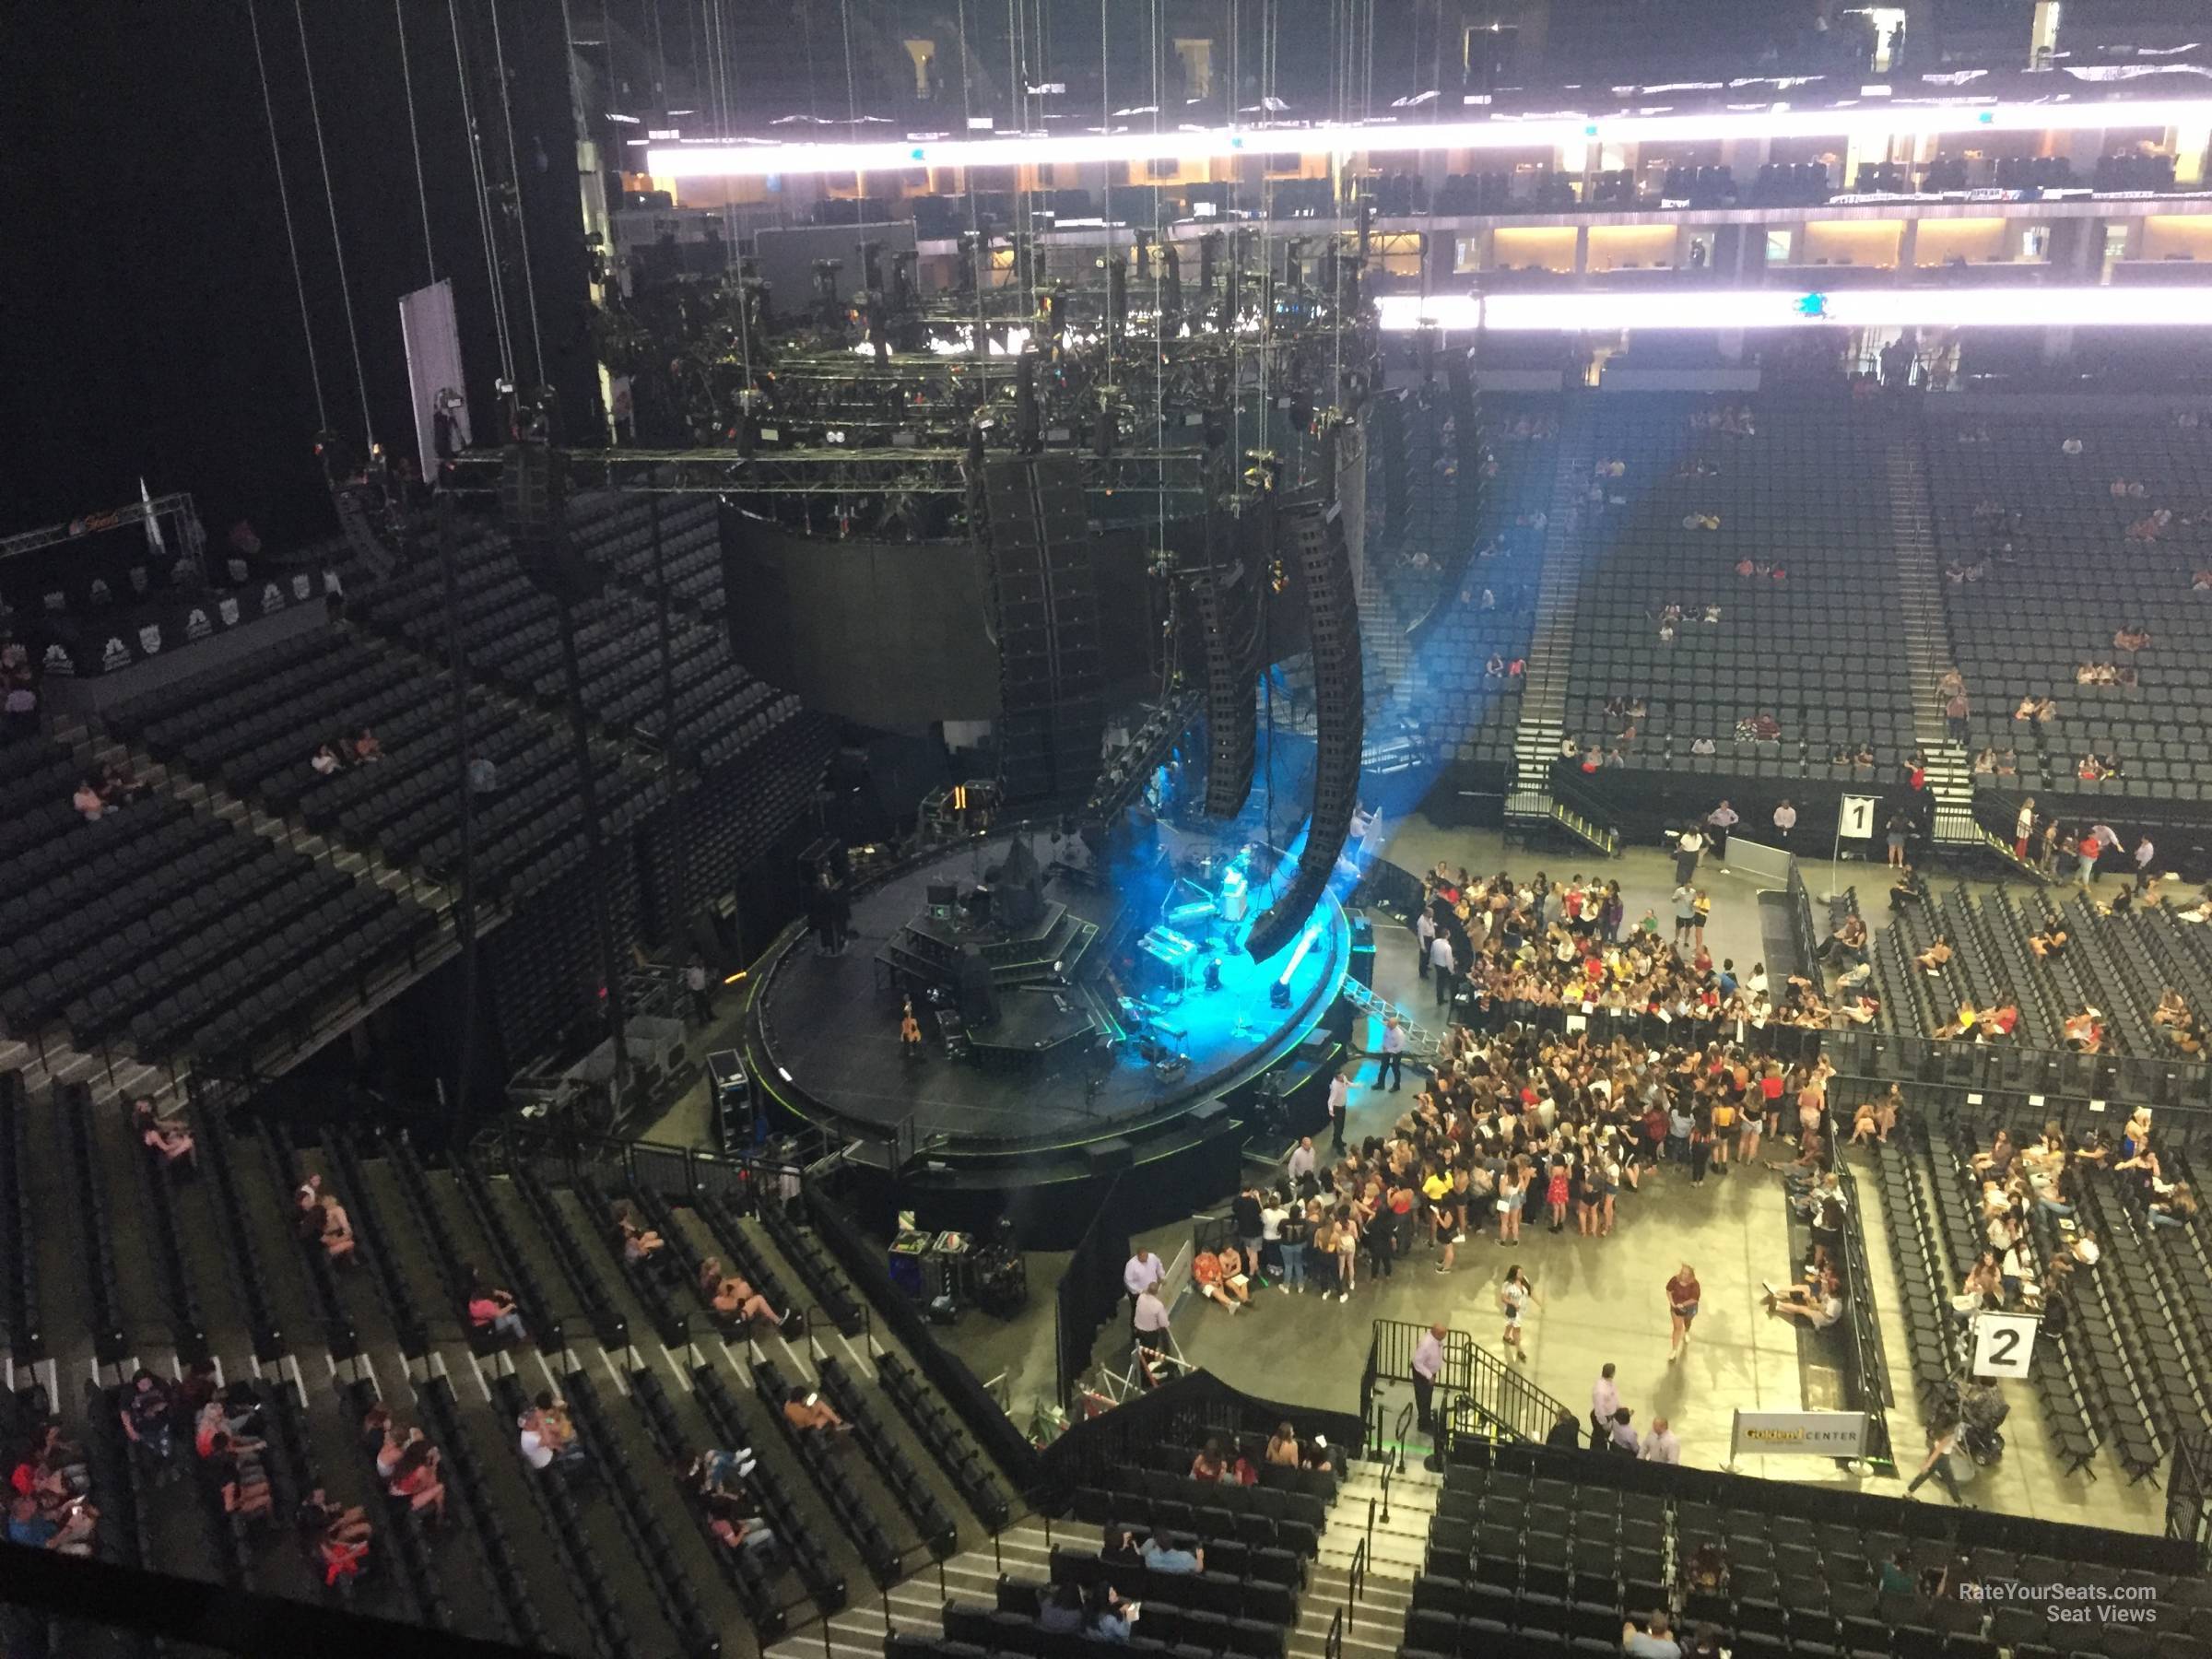 Section 219 at Golden 1 Center